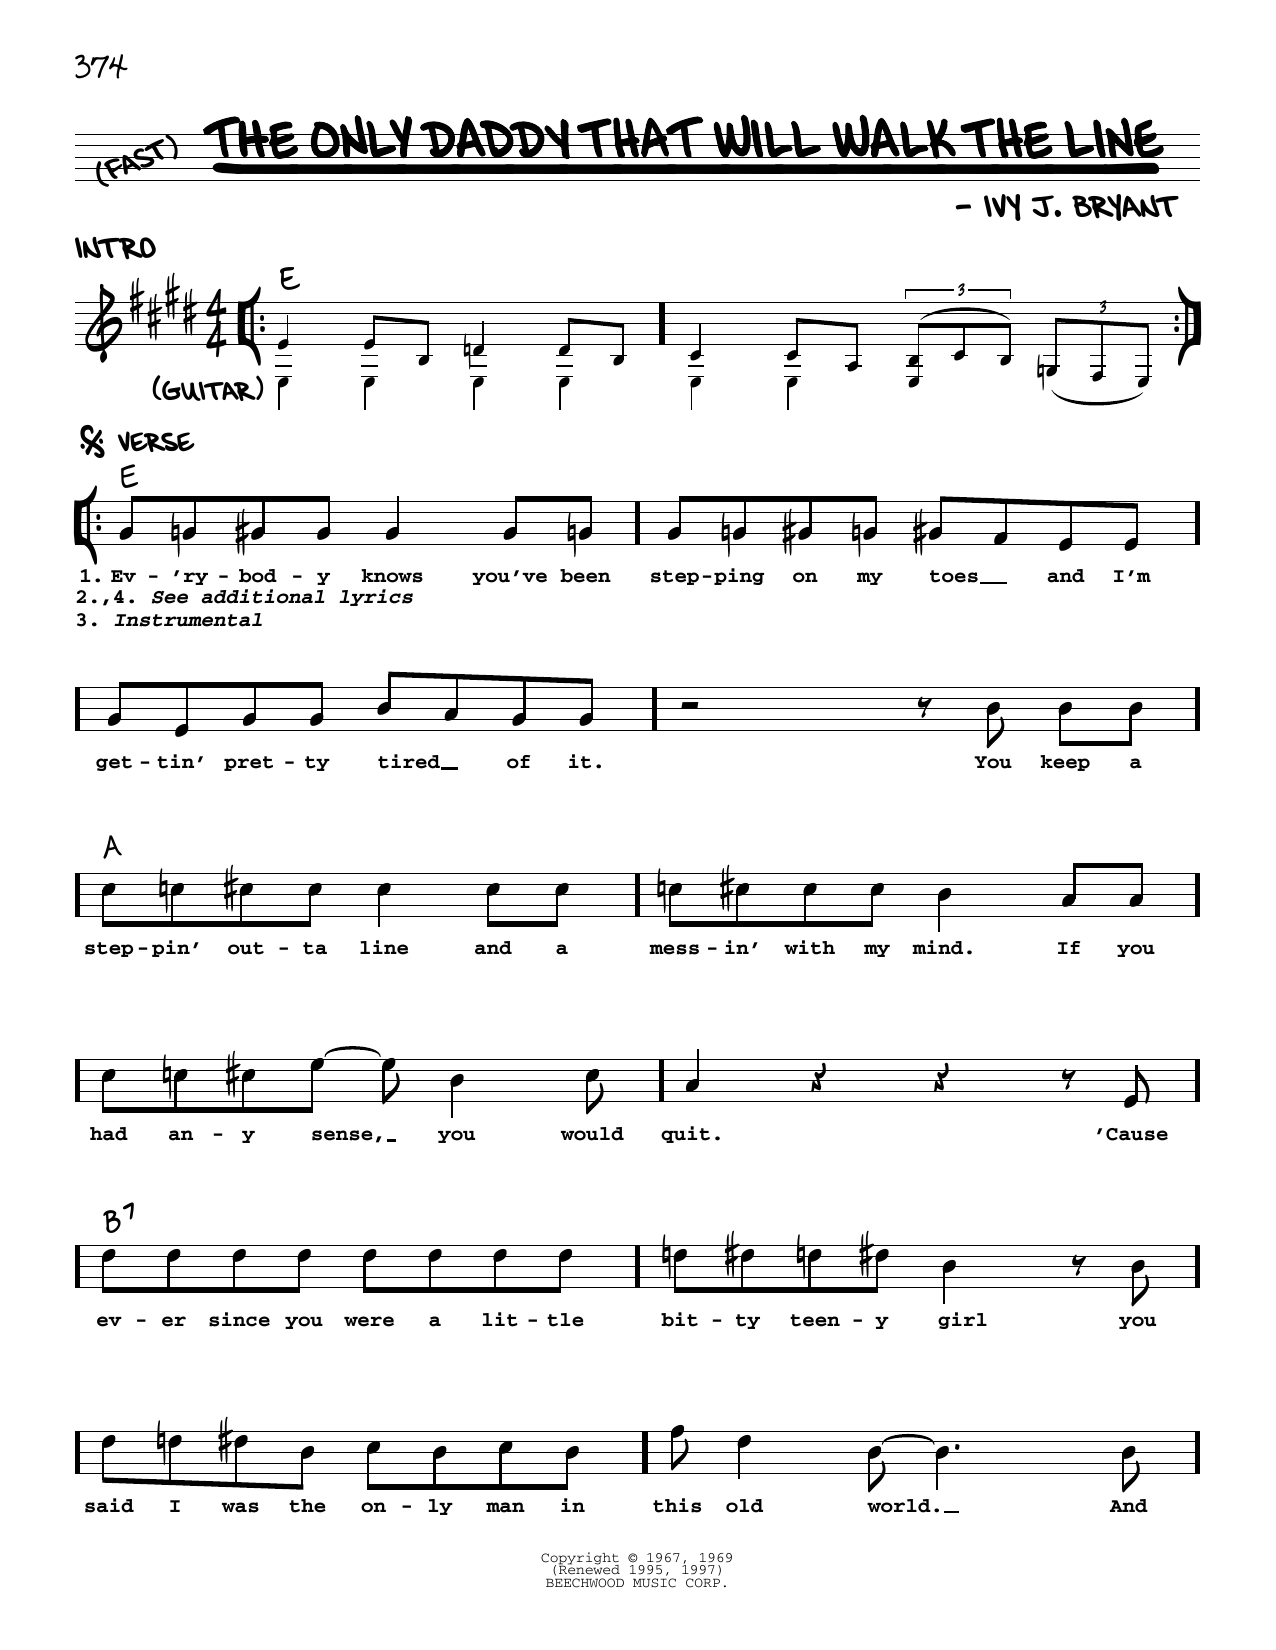 Download Waylon Jennings The Only Daddy That Will Walk The Line Sheet Music